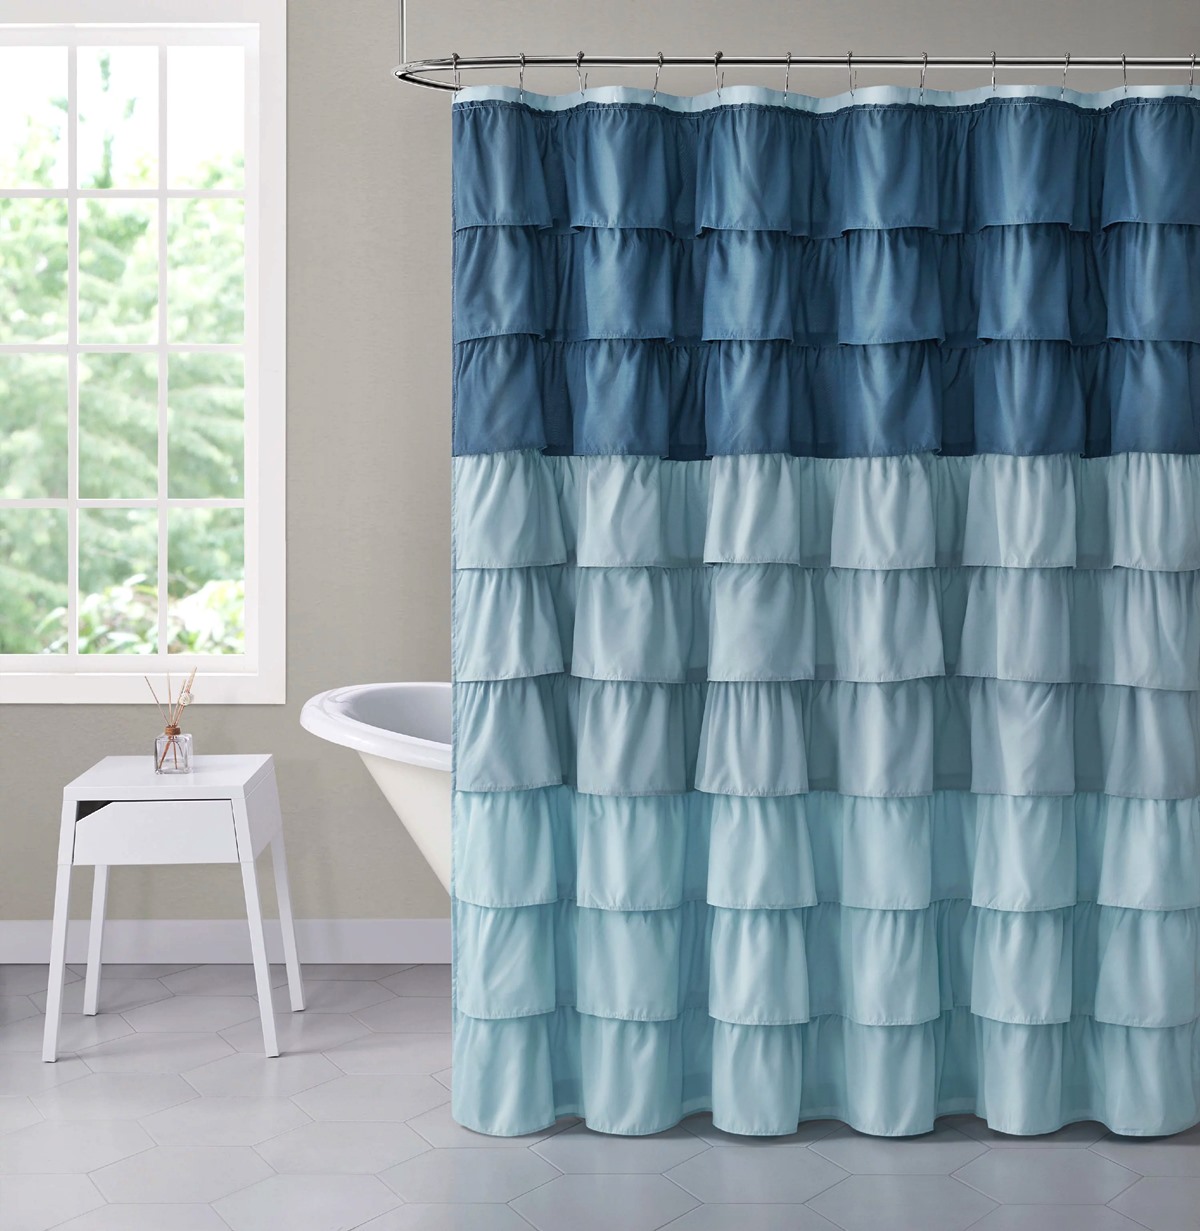 How To Make A Ruffle Shower Curtain